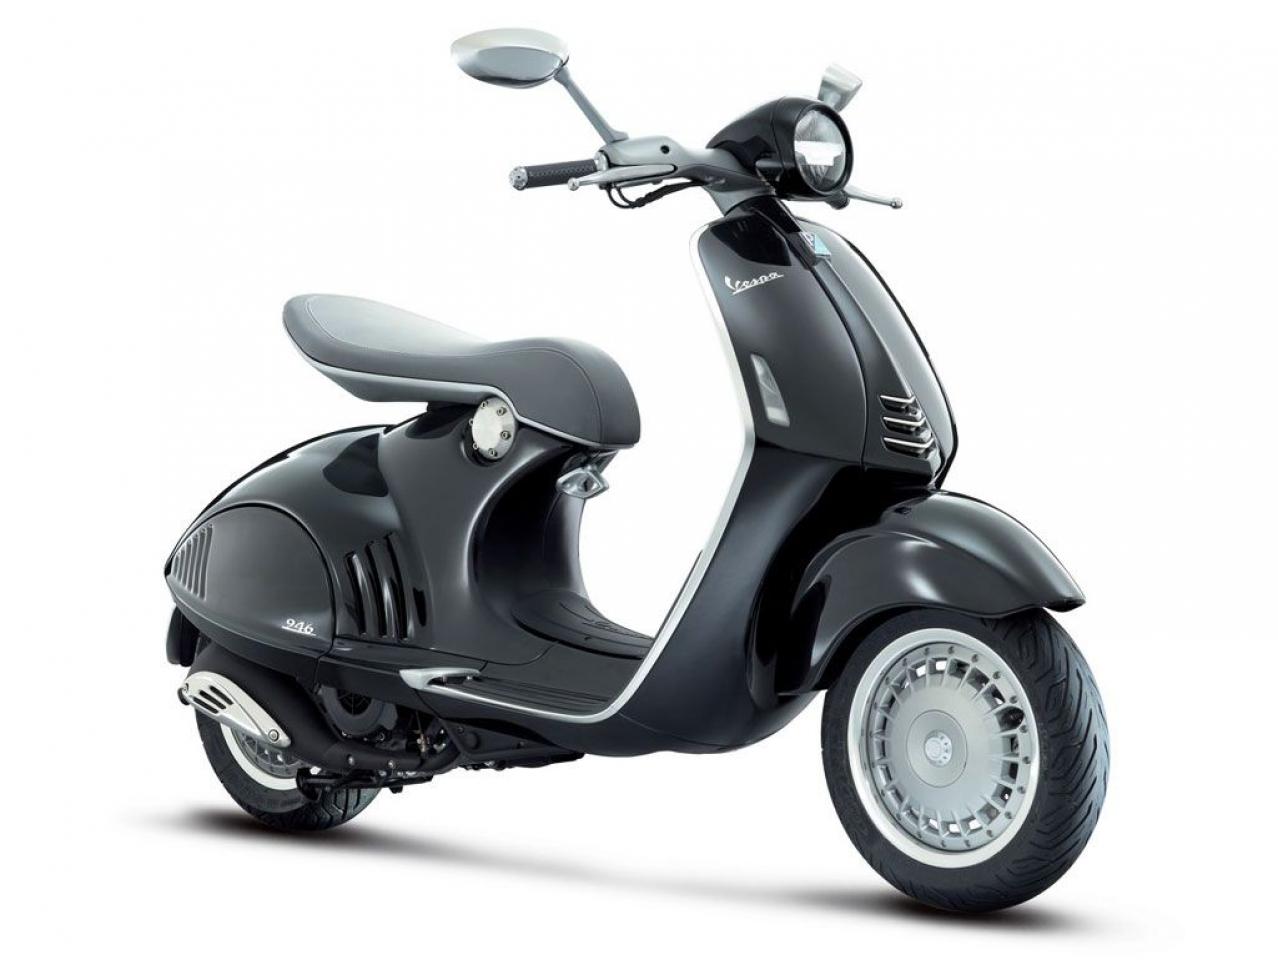 Vespa 946 Emporio Armani edition. Now launched at a whopping Rs. 12.04  lakhs - Team-BHP